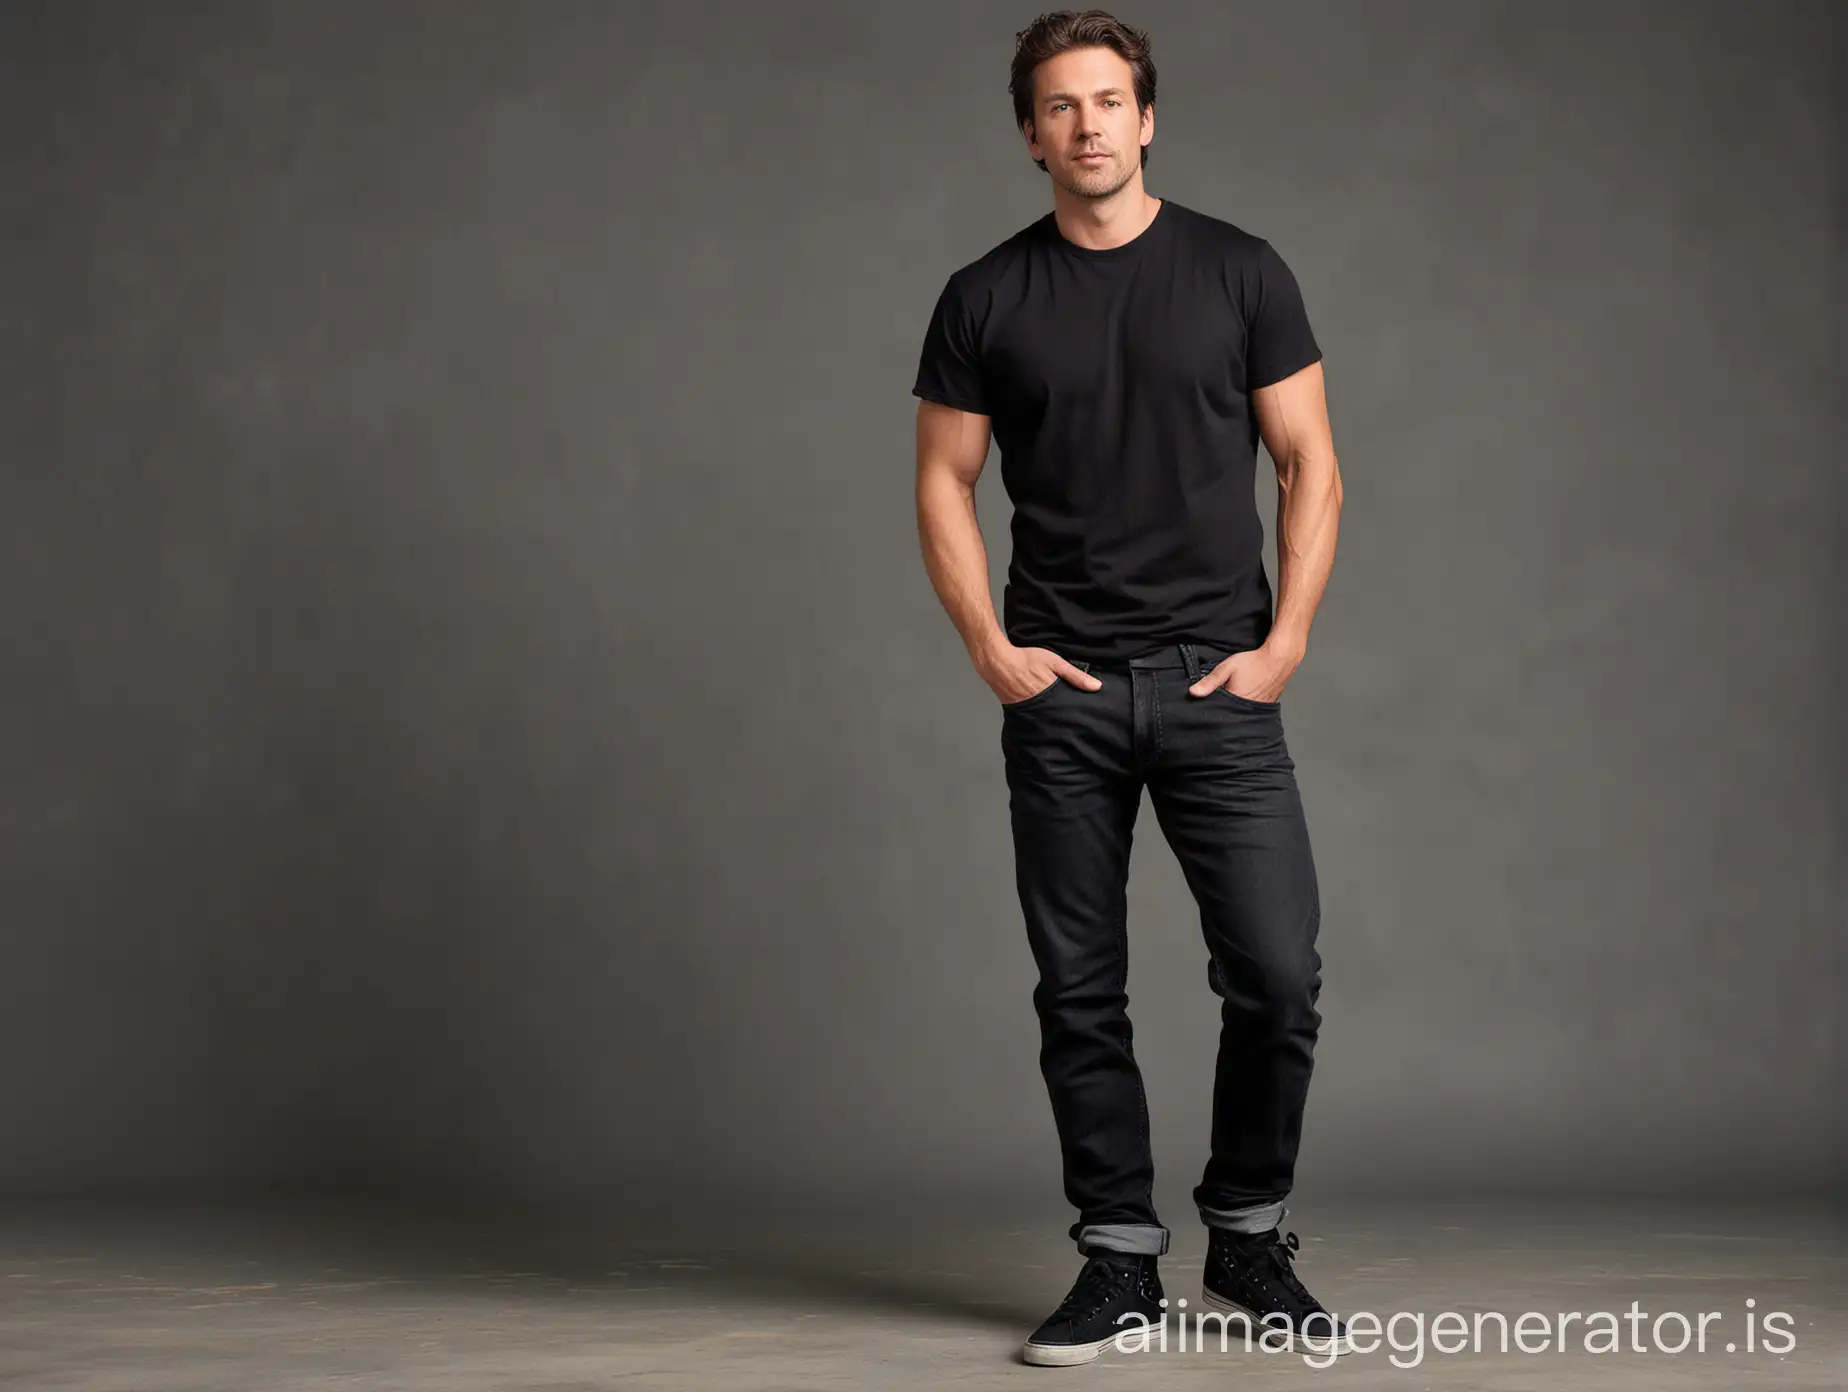 A 36-year-old Caucasian man with dark brown hair wearing a plain black shirt and jean pants, black sneakers